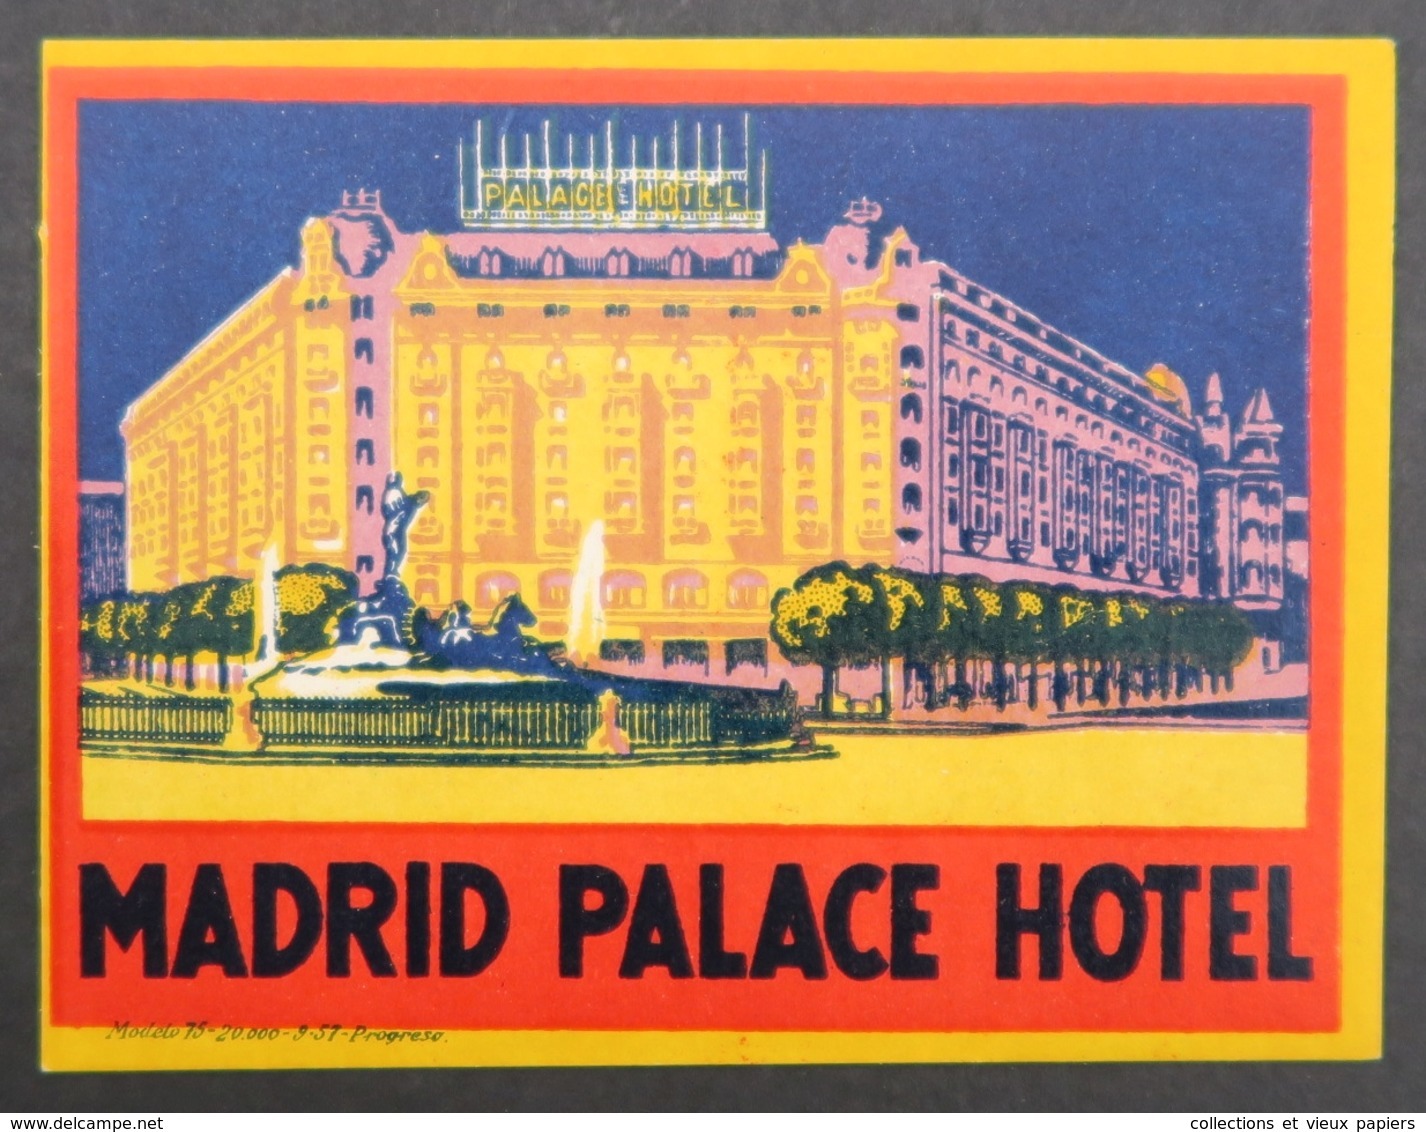 Ancienne étiquette Bagage Malle Valise MADRID PAALCE HOTEL Old Original Luggage Label - Etiquettes D'hotels